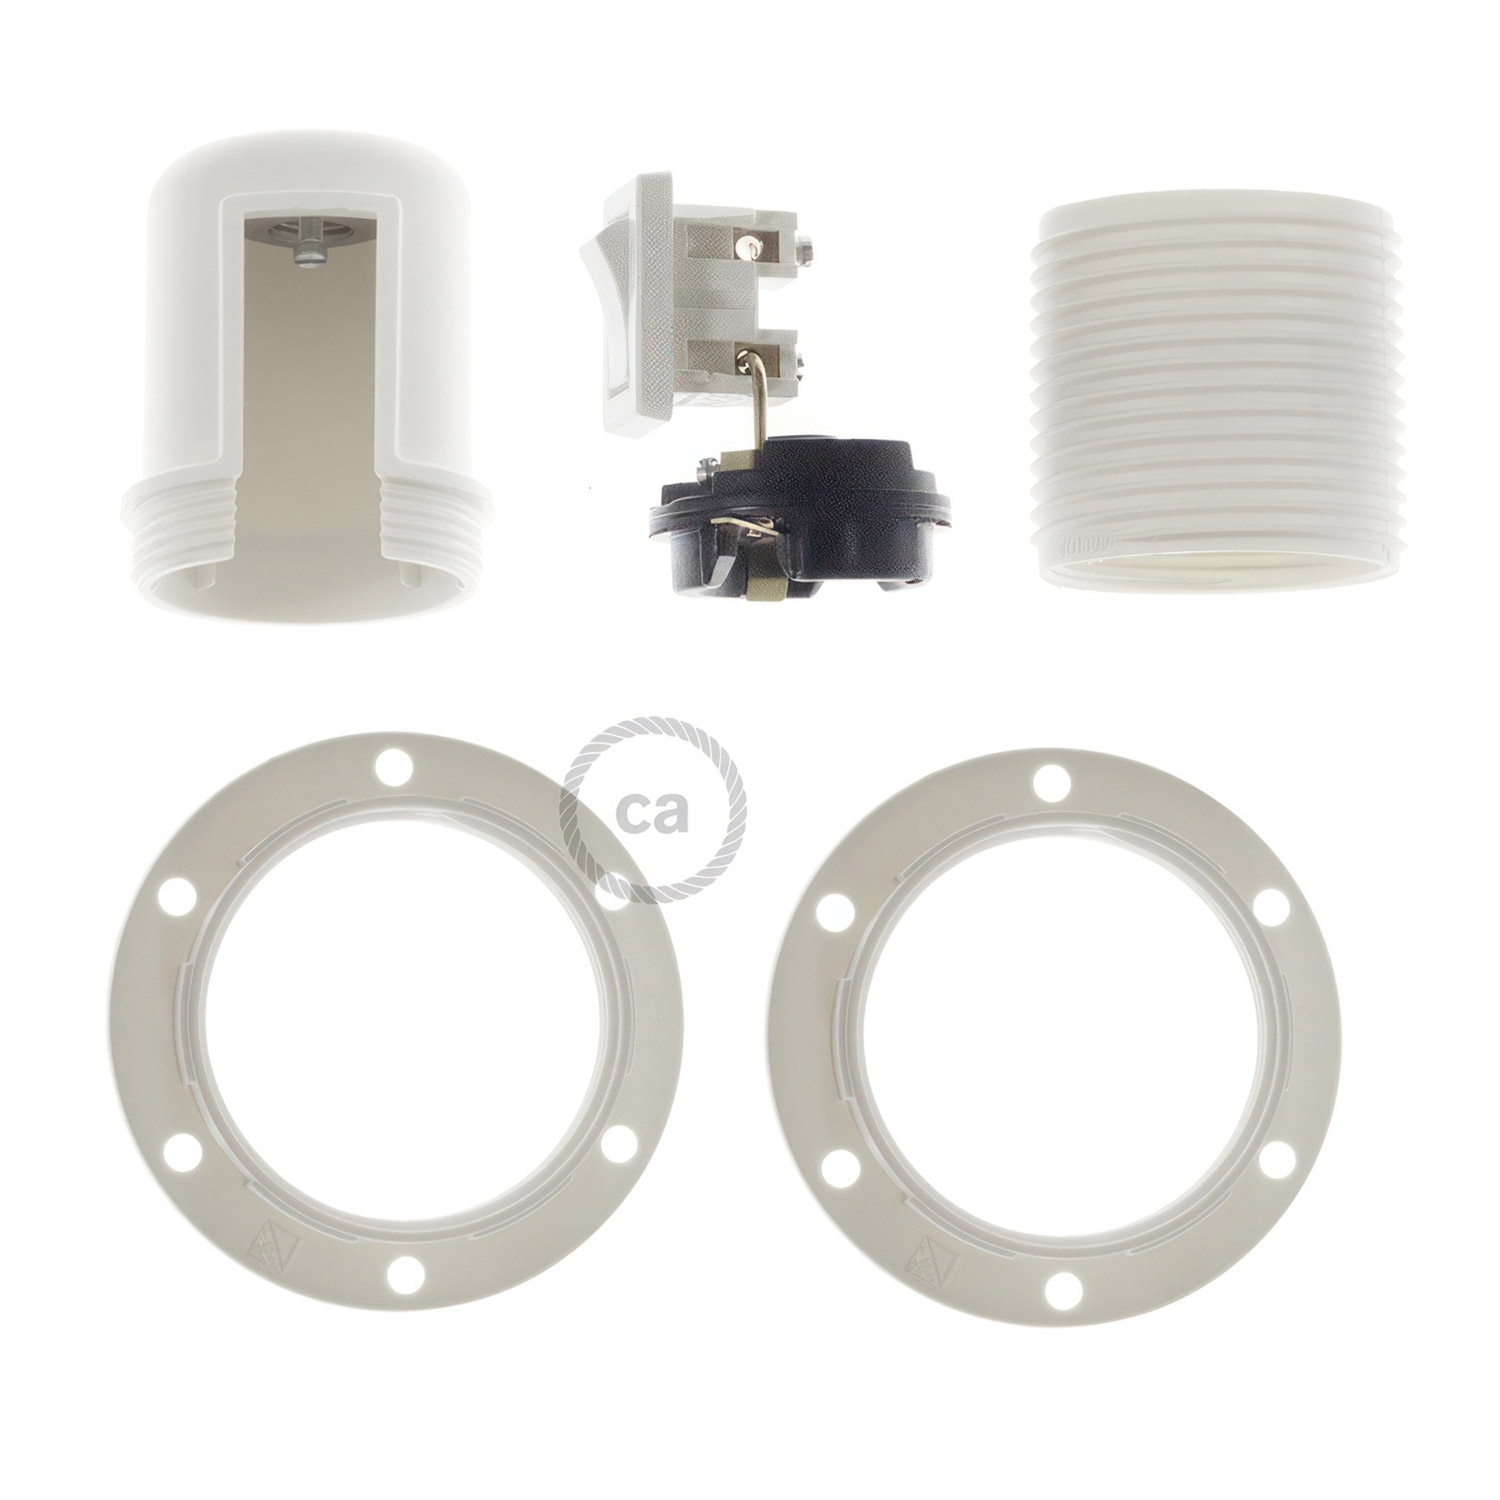 Thermoplastic E27 lamp holder kit for lampshade with switch